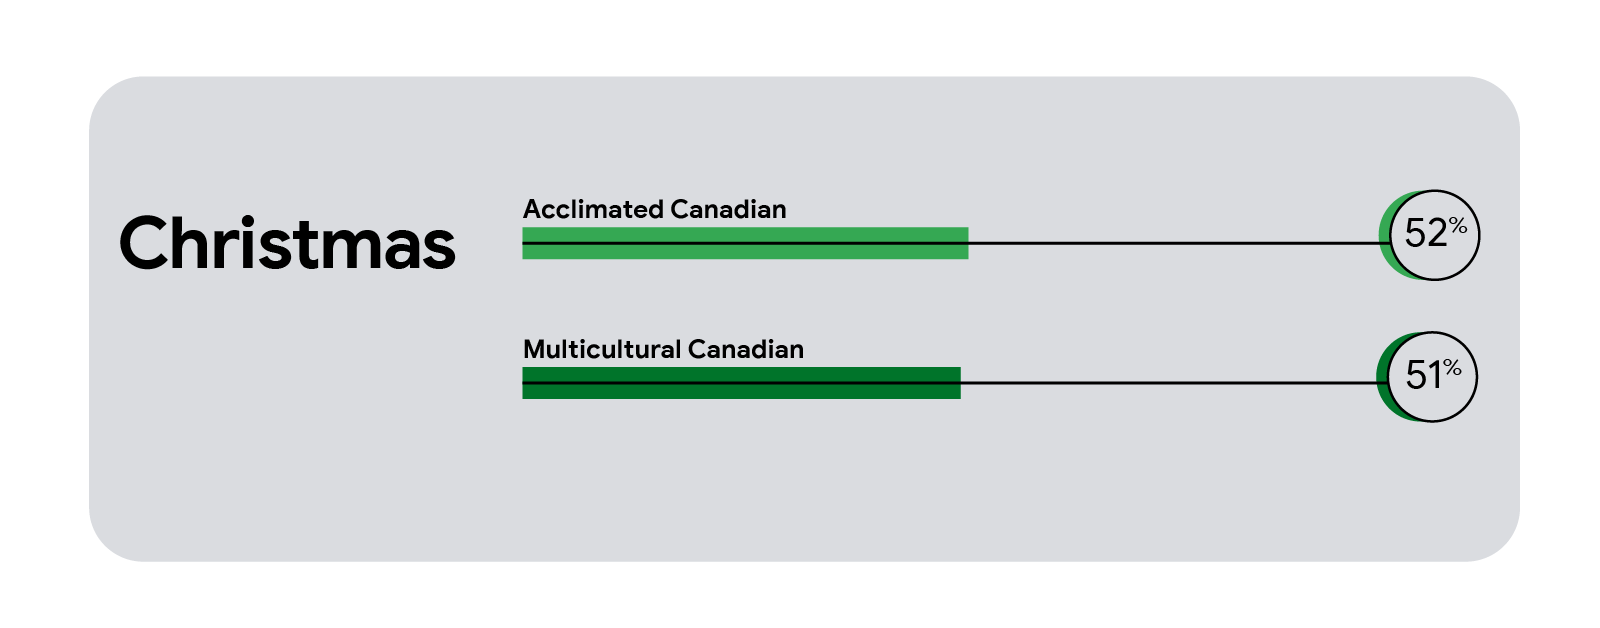 A horizontal bar chart showing 52% of acclimated Canadians and 51% of multicultural Canadians celebrate Christmas.